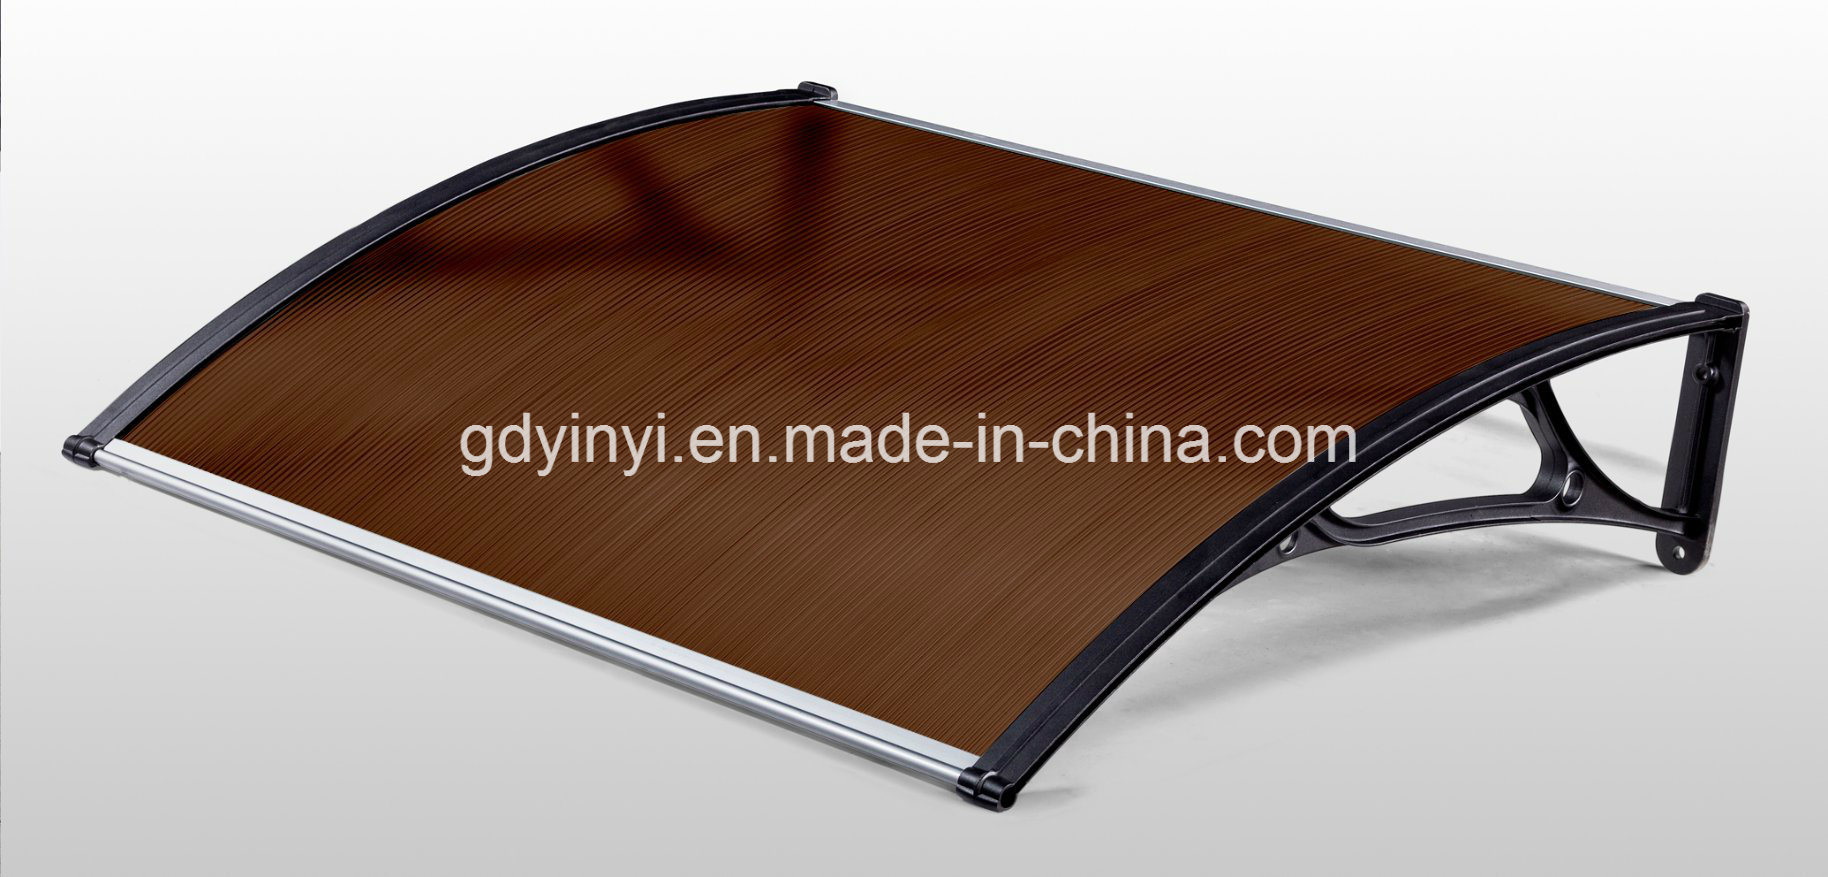 Used Awning Components for Sales Balcony Sun Shades Polycarbonate Sheet Canopy (YY-F1000)